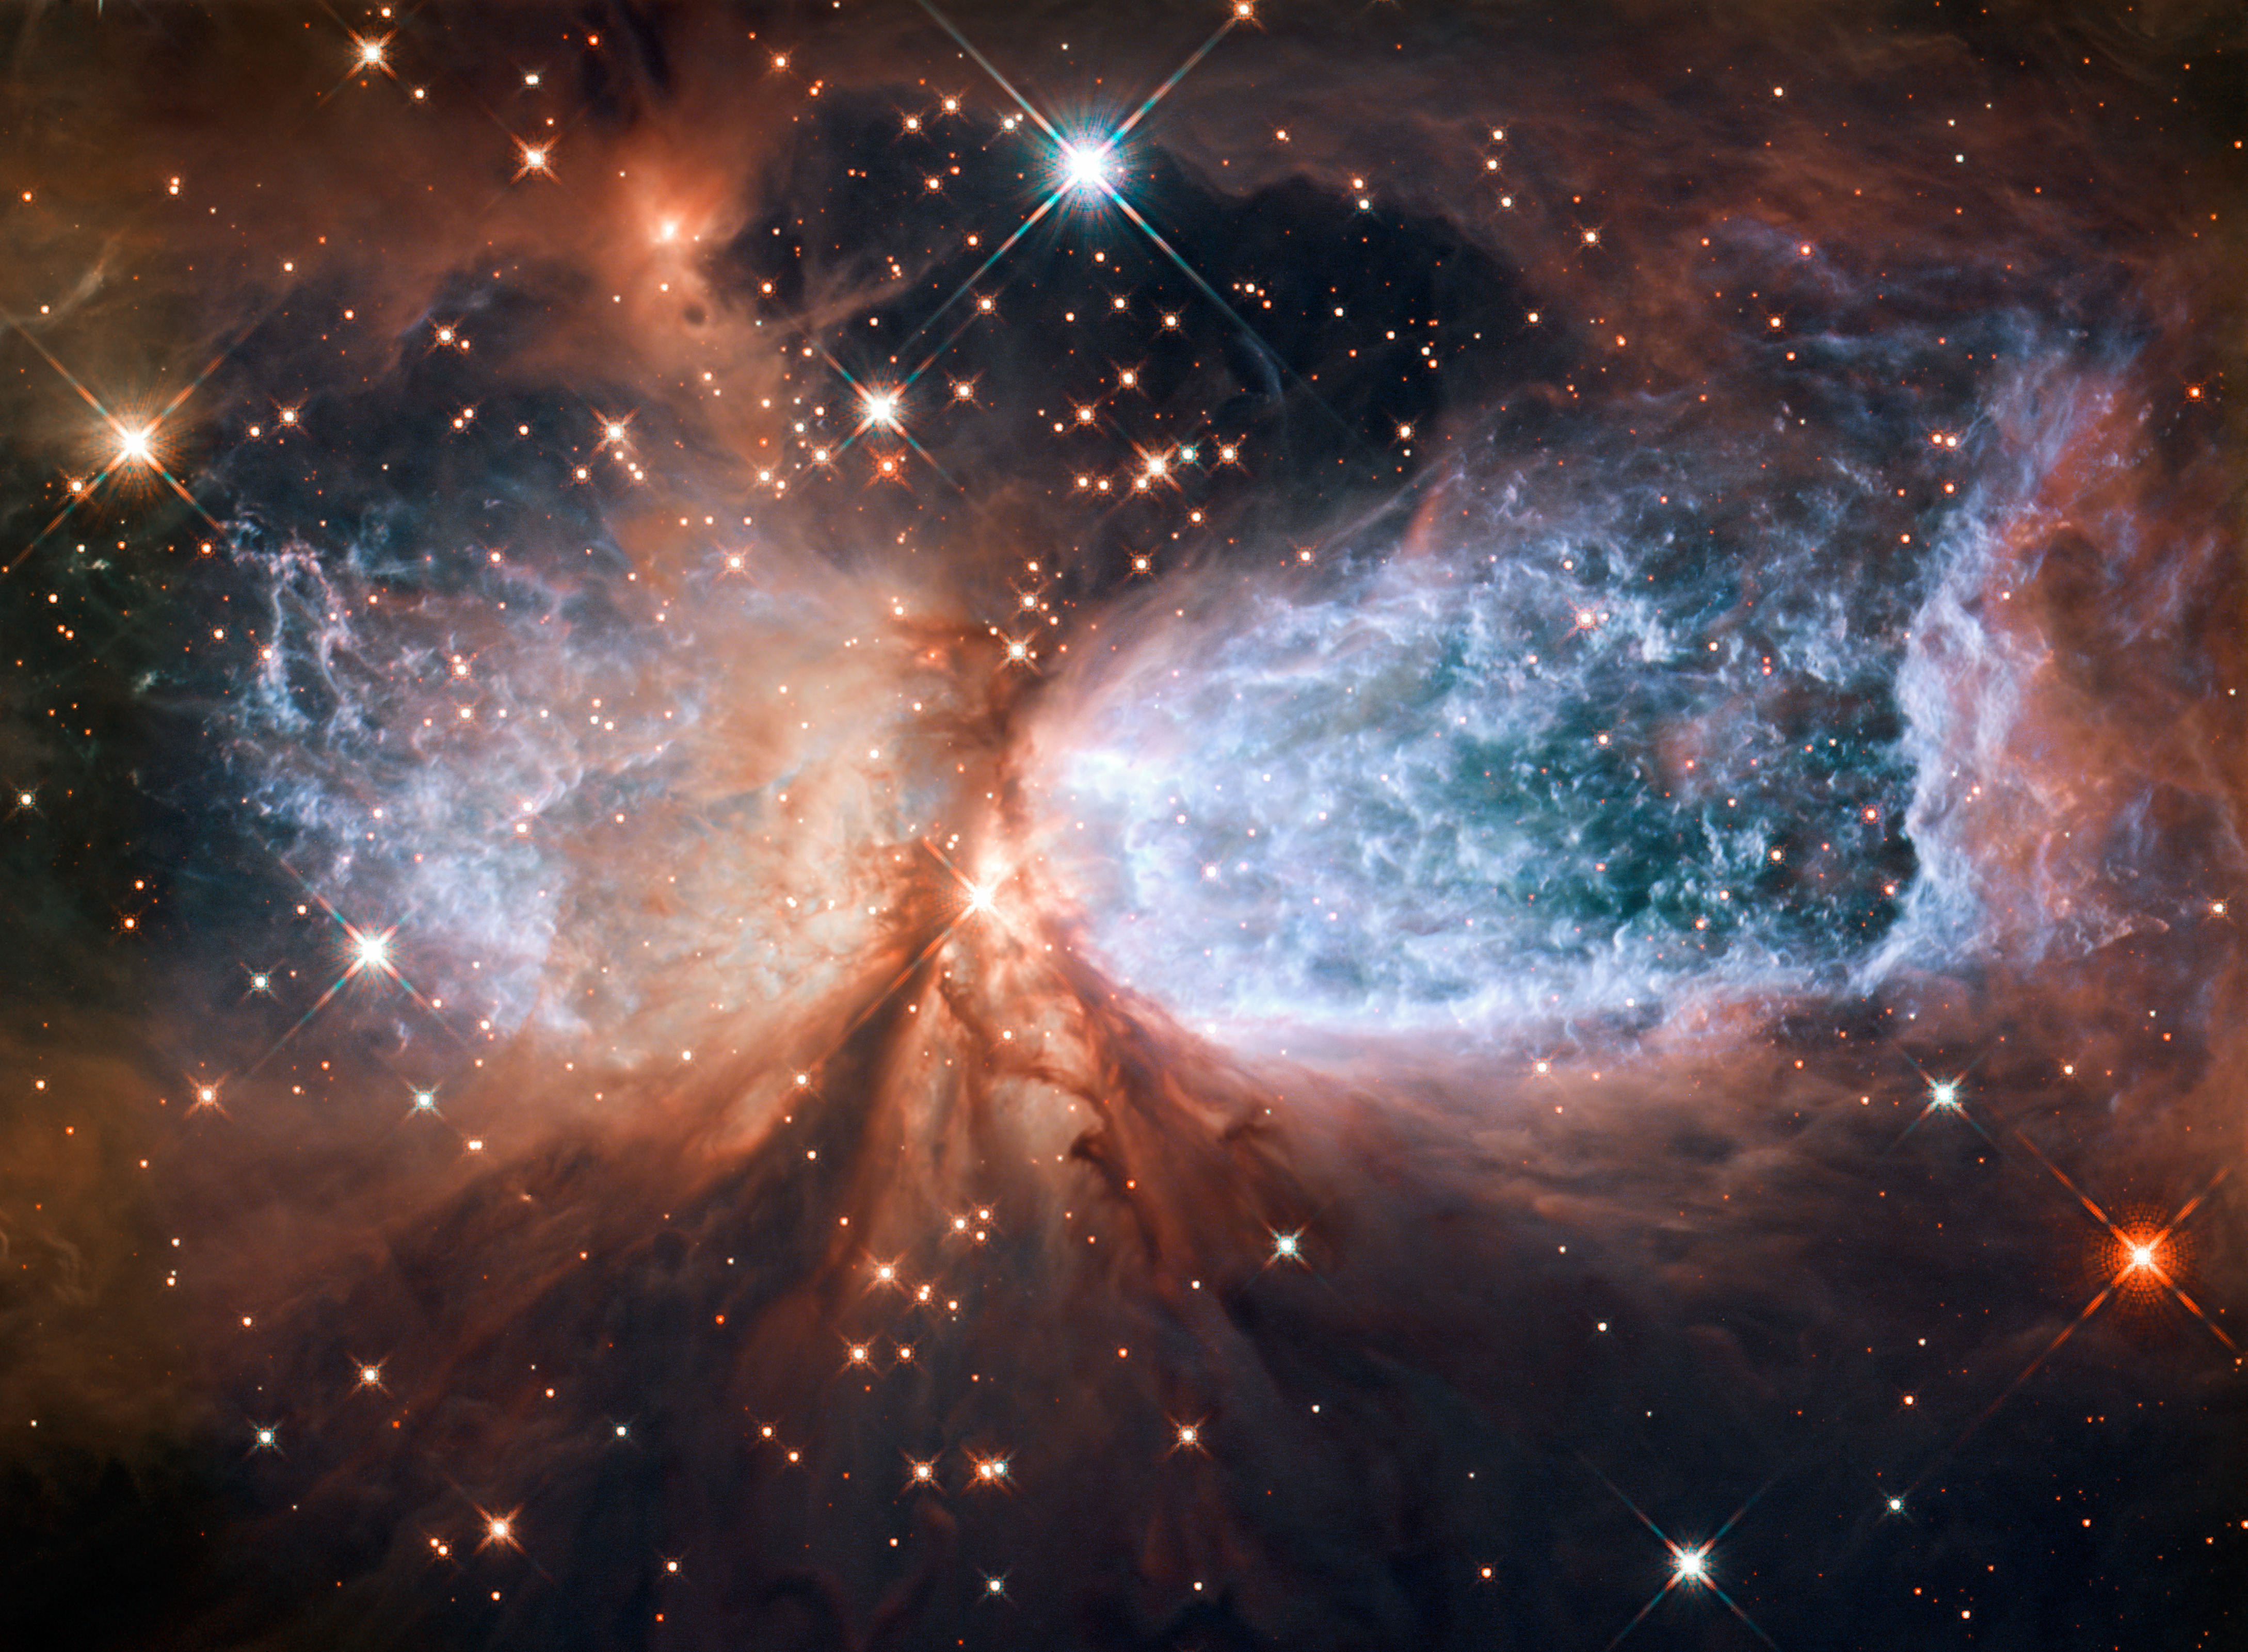 This is a compact star forming region in the constellation Cygnus. A newly-formed star called S106 IR is shrouded in dust at the centre of the image, and is responsible for the surrounding gas cloud’s hourglass-like shape and the turbulence visible within. Light from glowing hydrogen is coloured blue in this image.